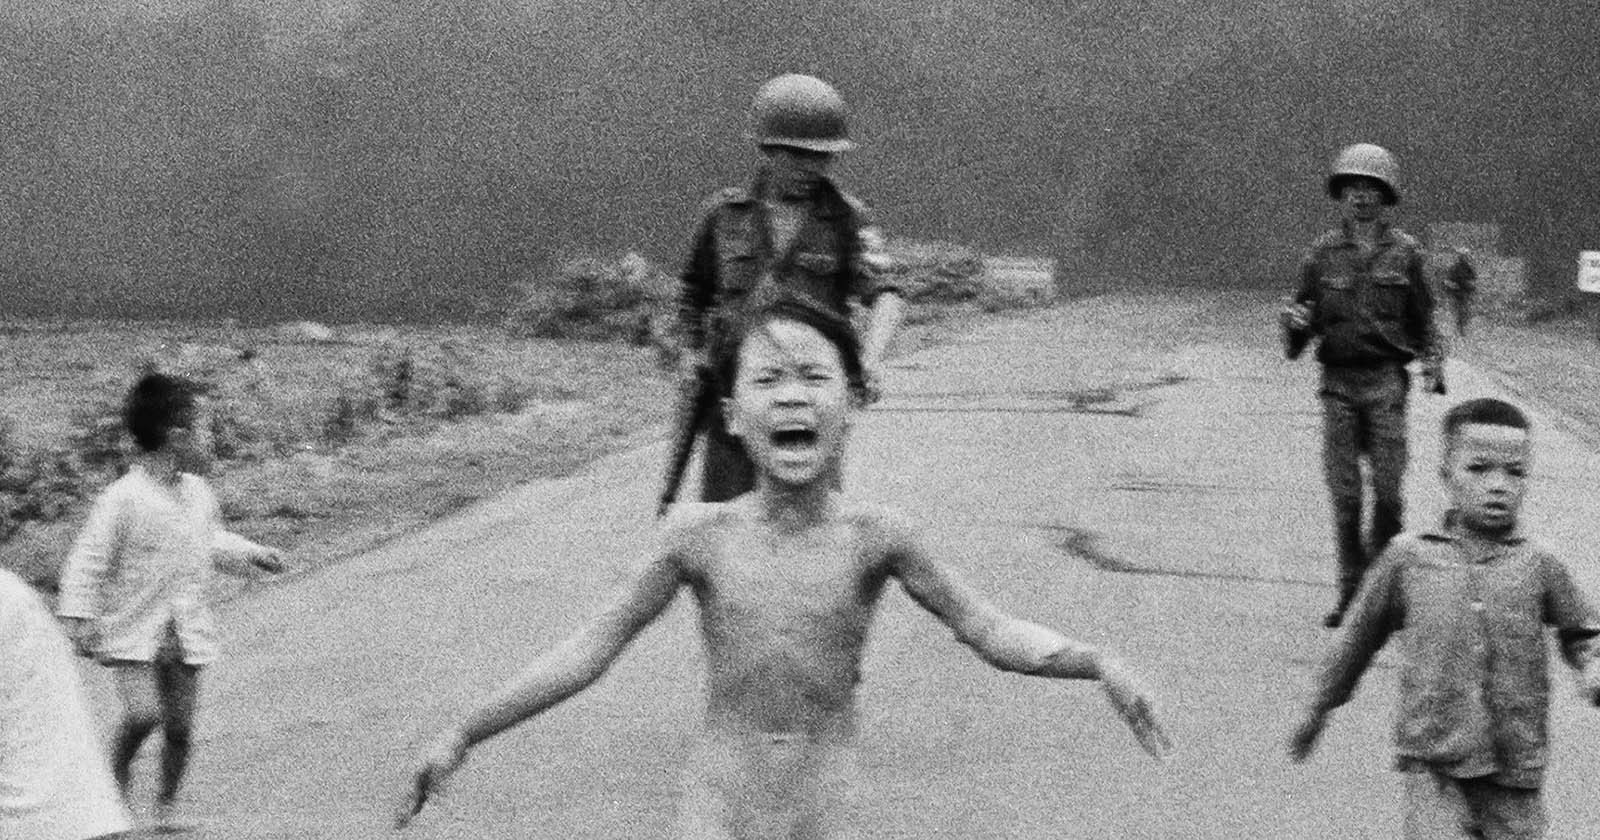 50 Years After Napalm Girl, Myths Distort the Reality Behind a Horrific Photo